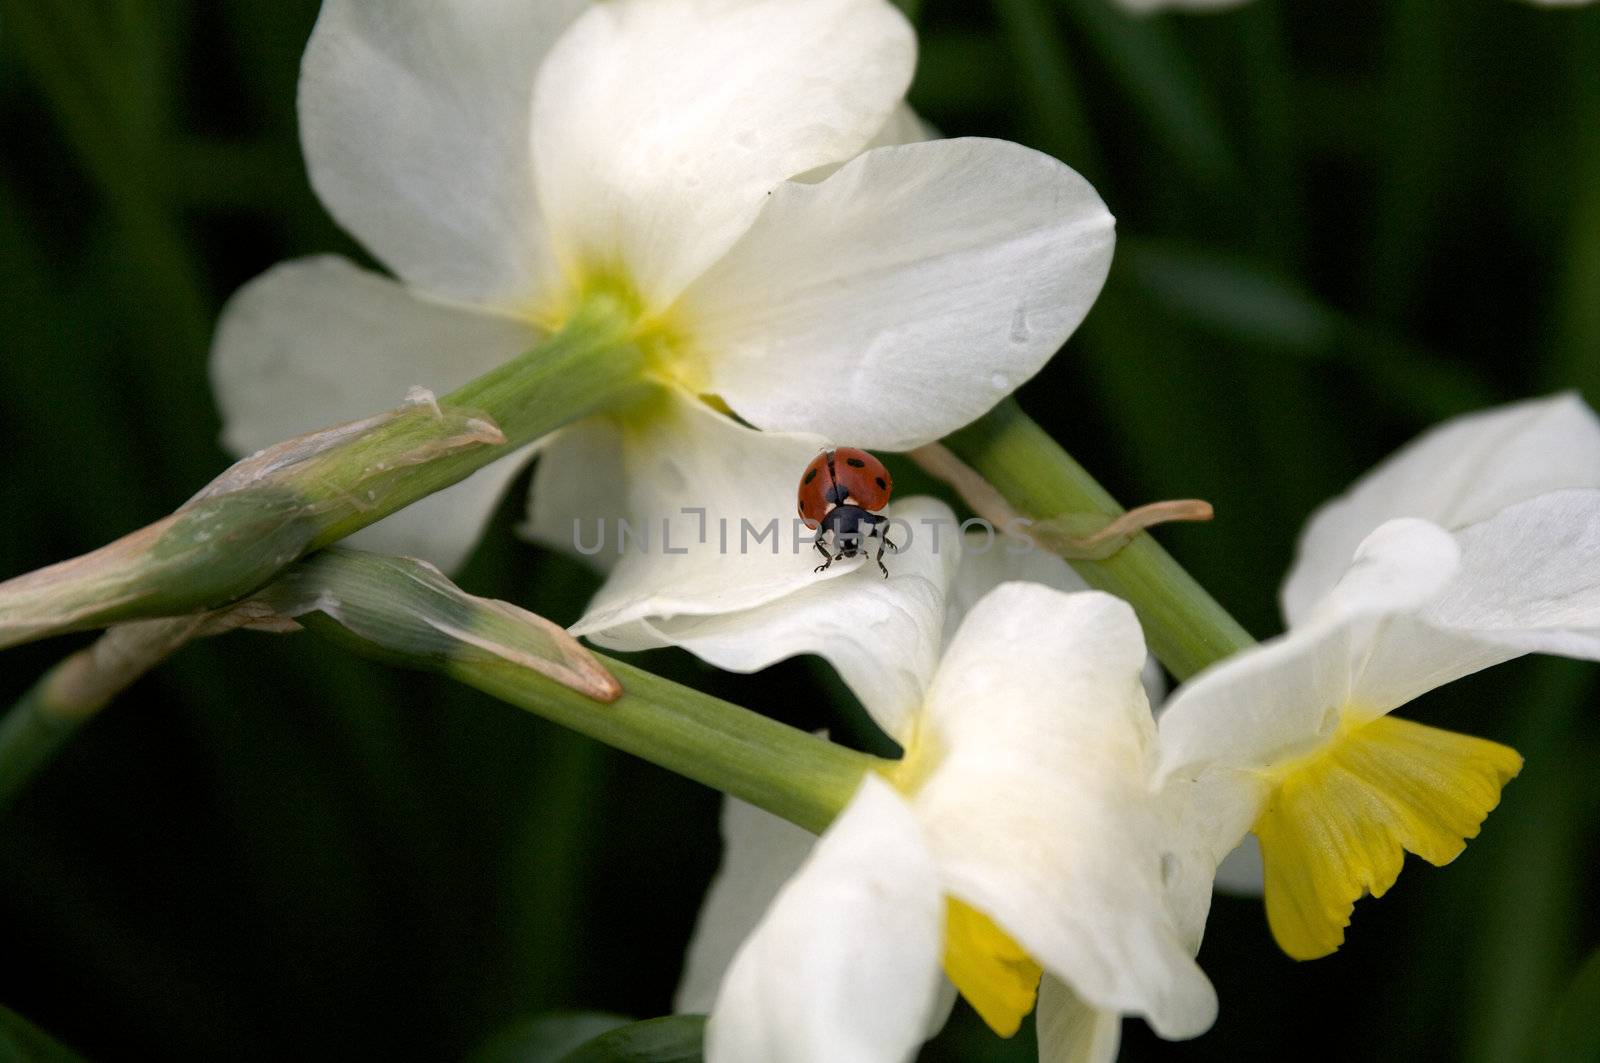 Ladybug into narcissus flowers in natural environment